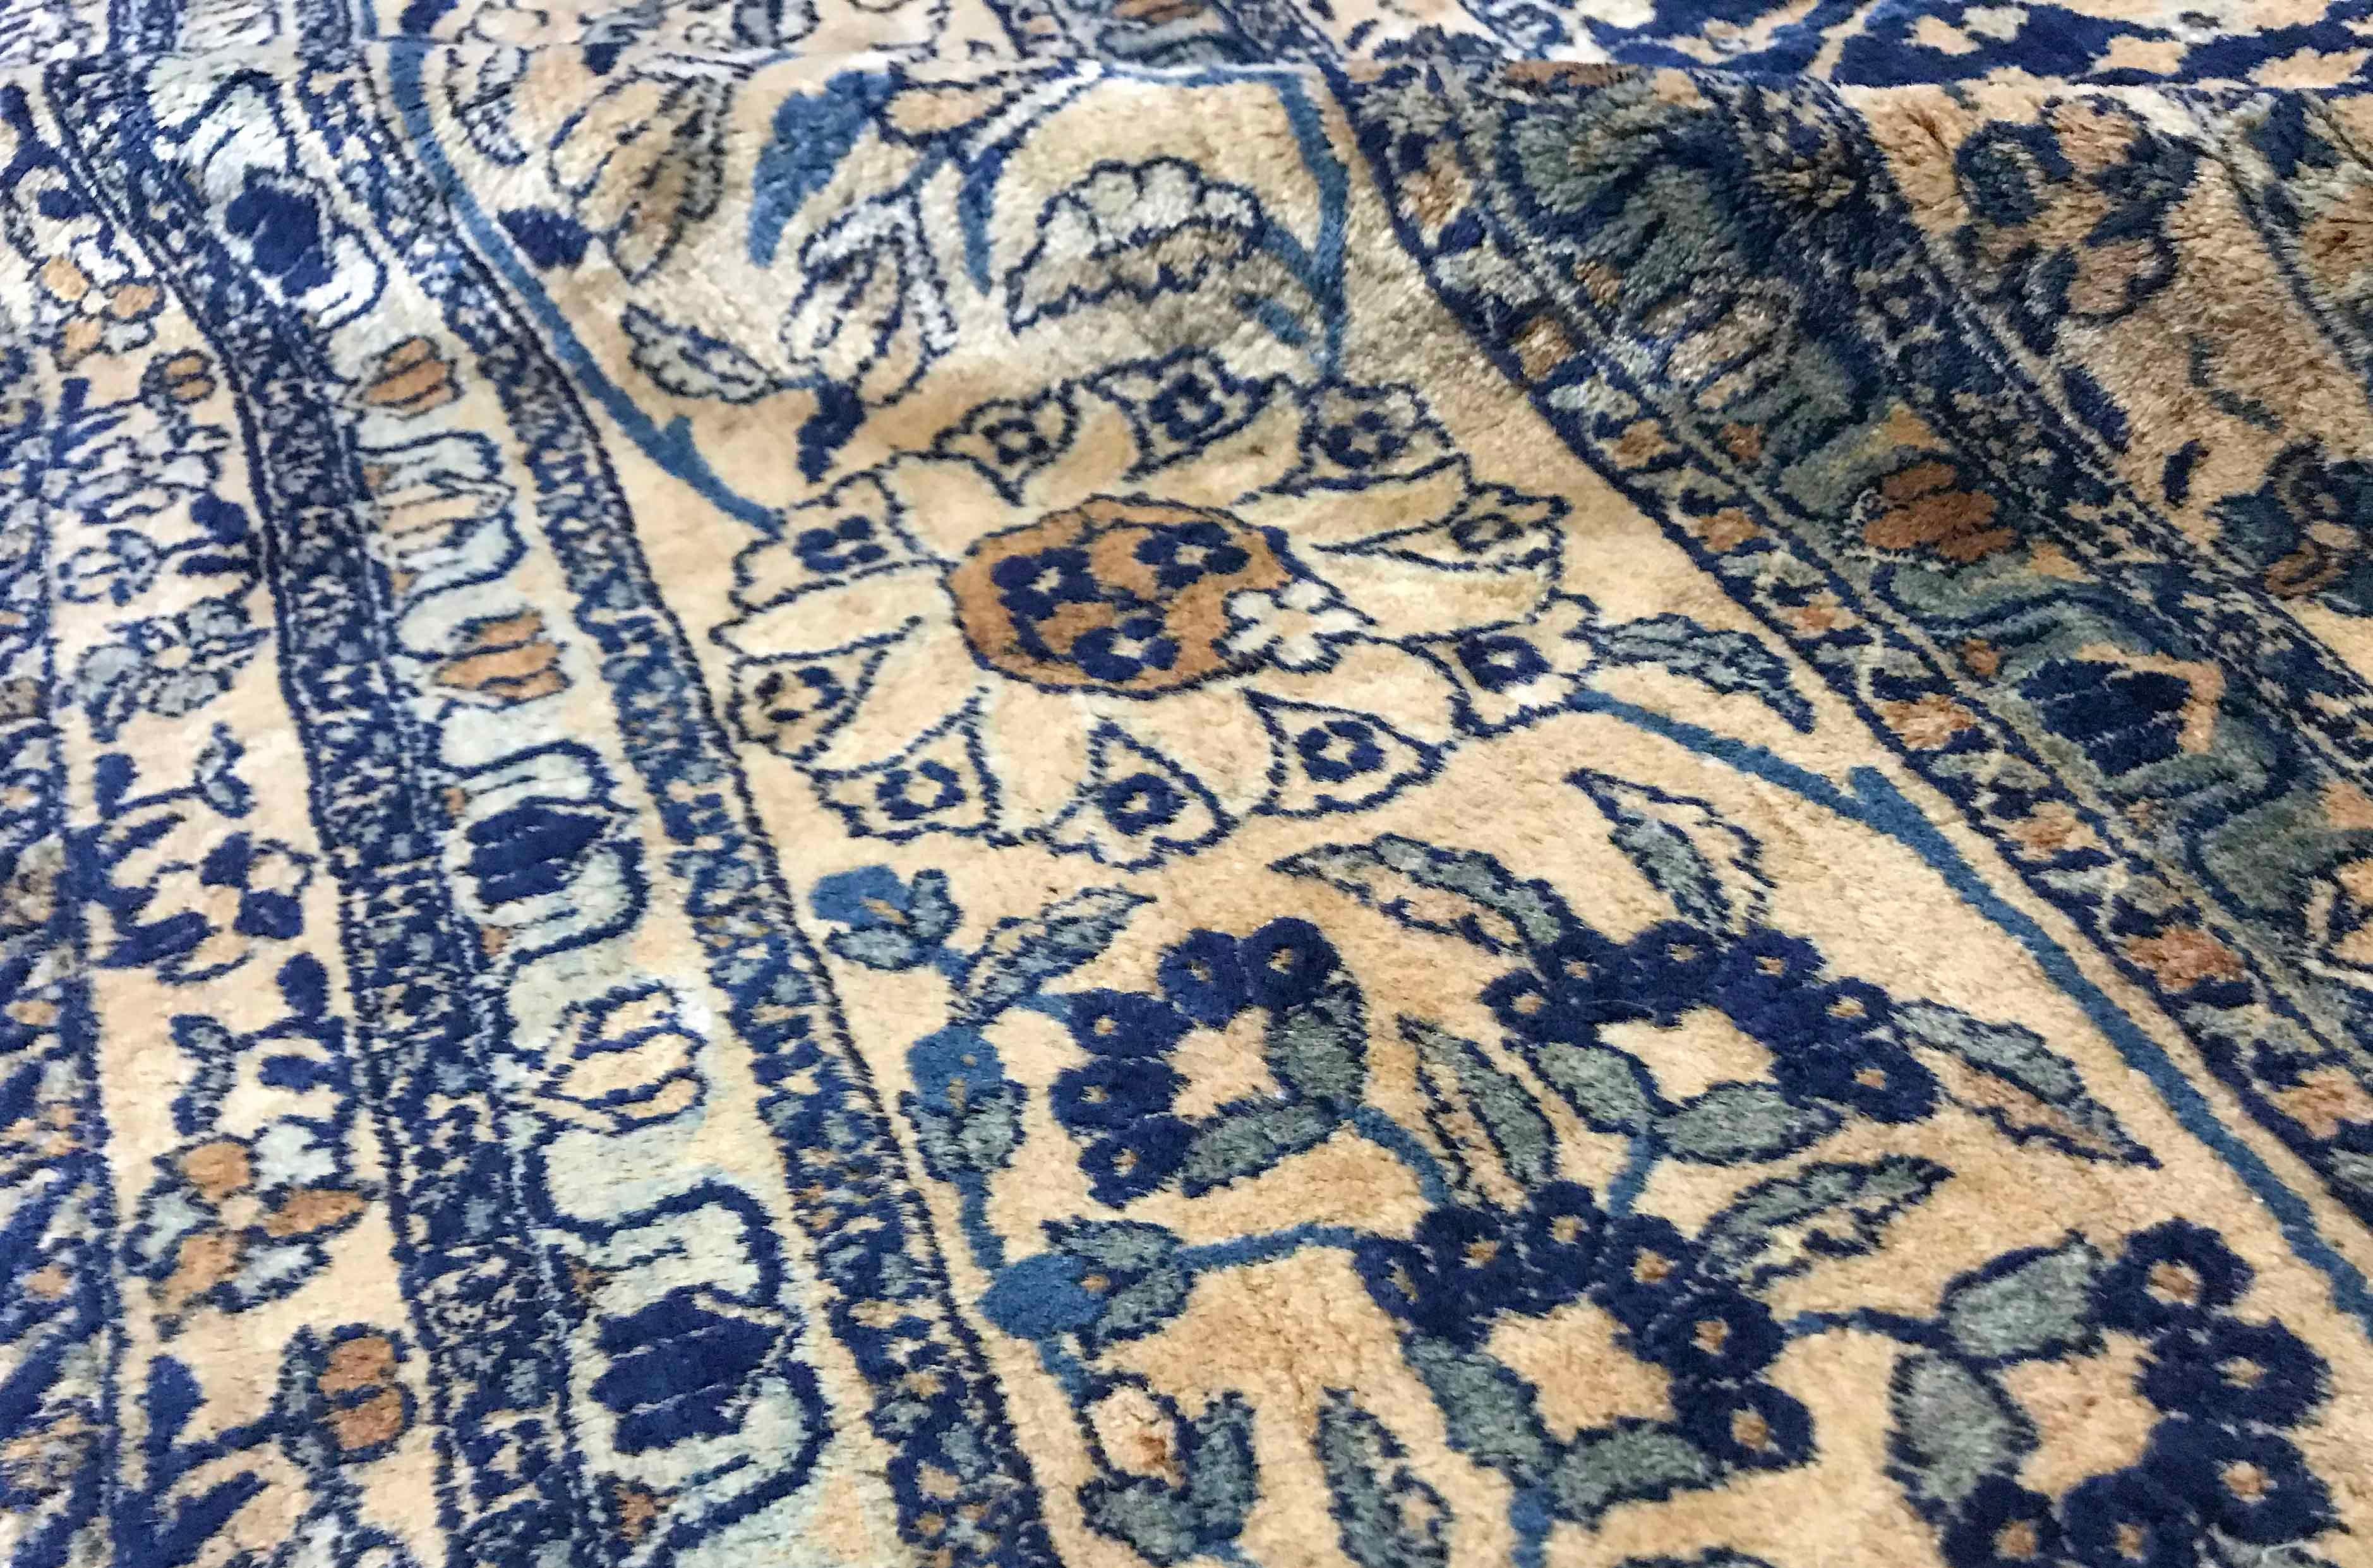 Vintage Persian Kerman rug, circa 1940. A vintage Kerman rug with the field filled with diamond designs each having a different flower-patterned interior all surrounded by a main border and multiple guard borders to give this rug a look of strength